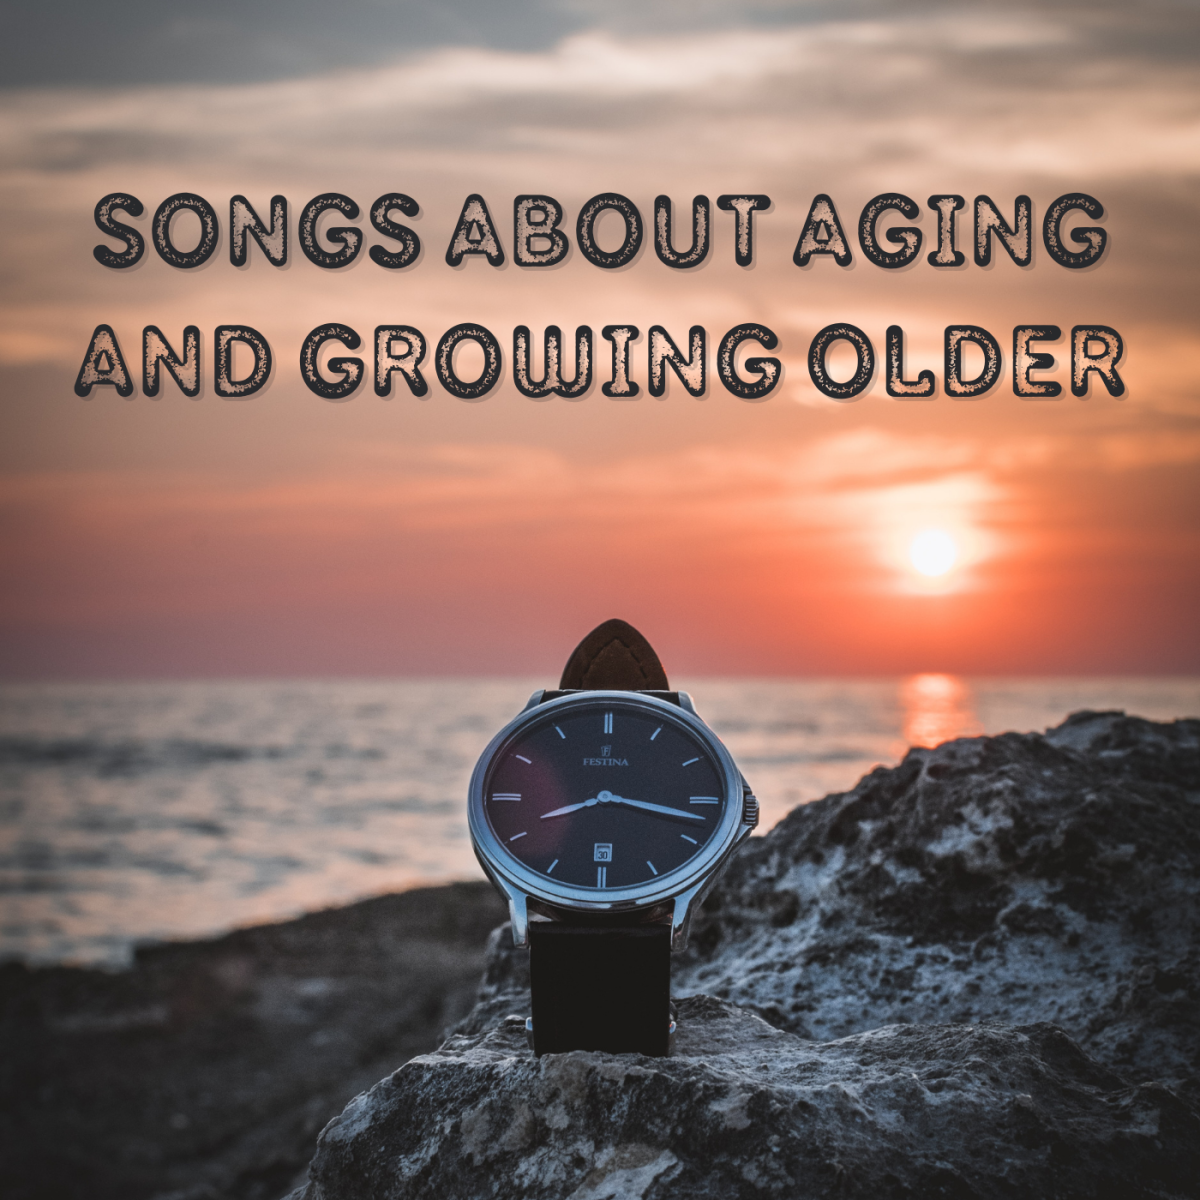 20 Songs about Aging and the Emotions That Come with Getting Older